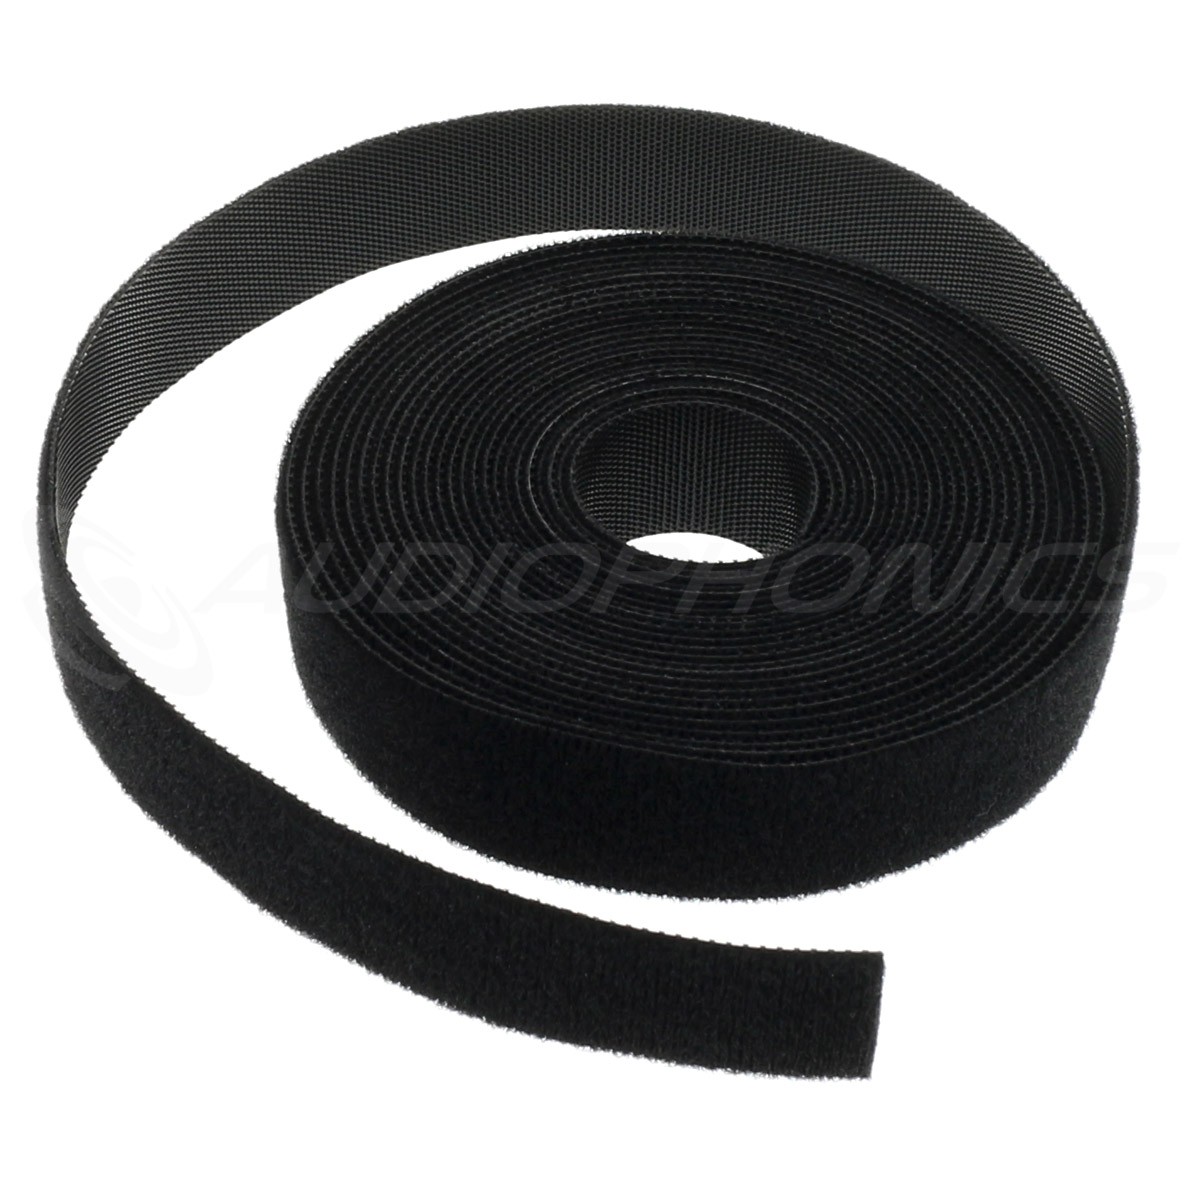 CABLE STRAP Roller - cable clamp Scratch 1.8m